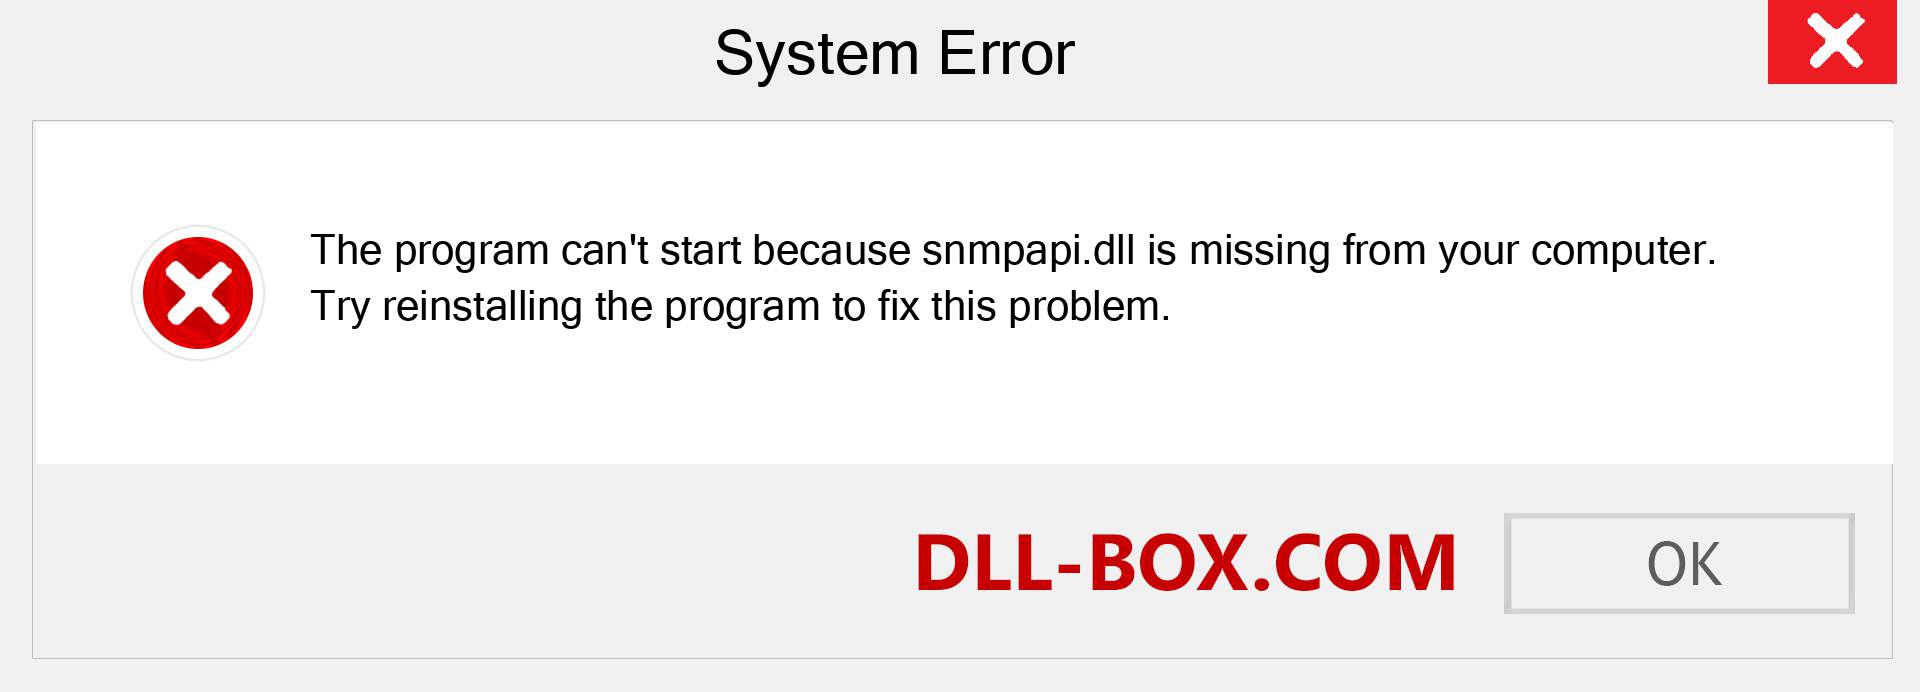  snmpapi.dll file is missing?. Download for Windows 7, 8, 10 - Fix  snmpapi dll Missing Error on Windows, photos, images